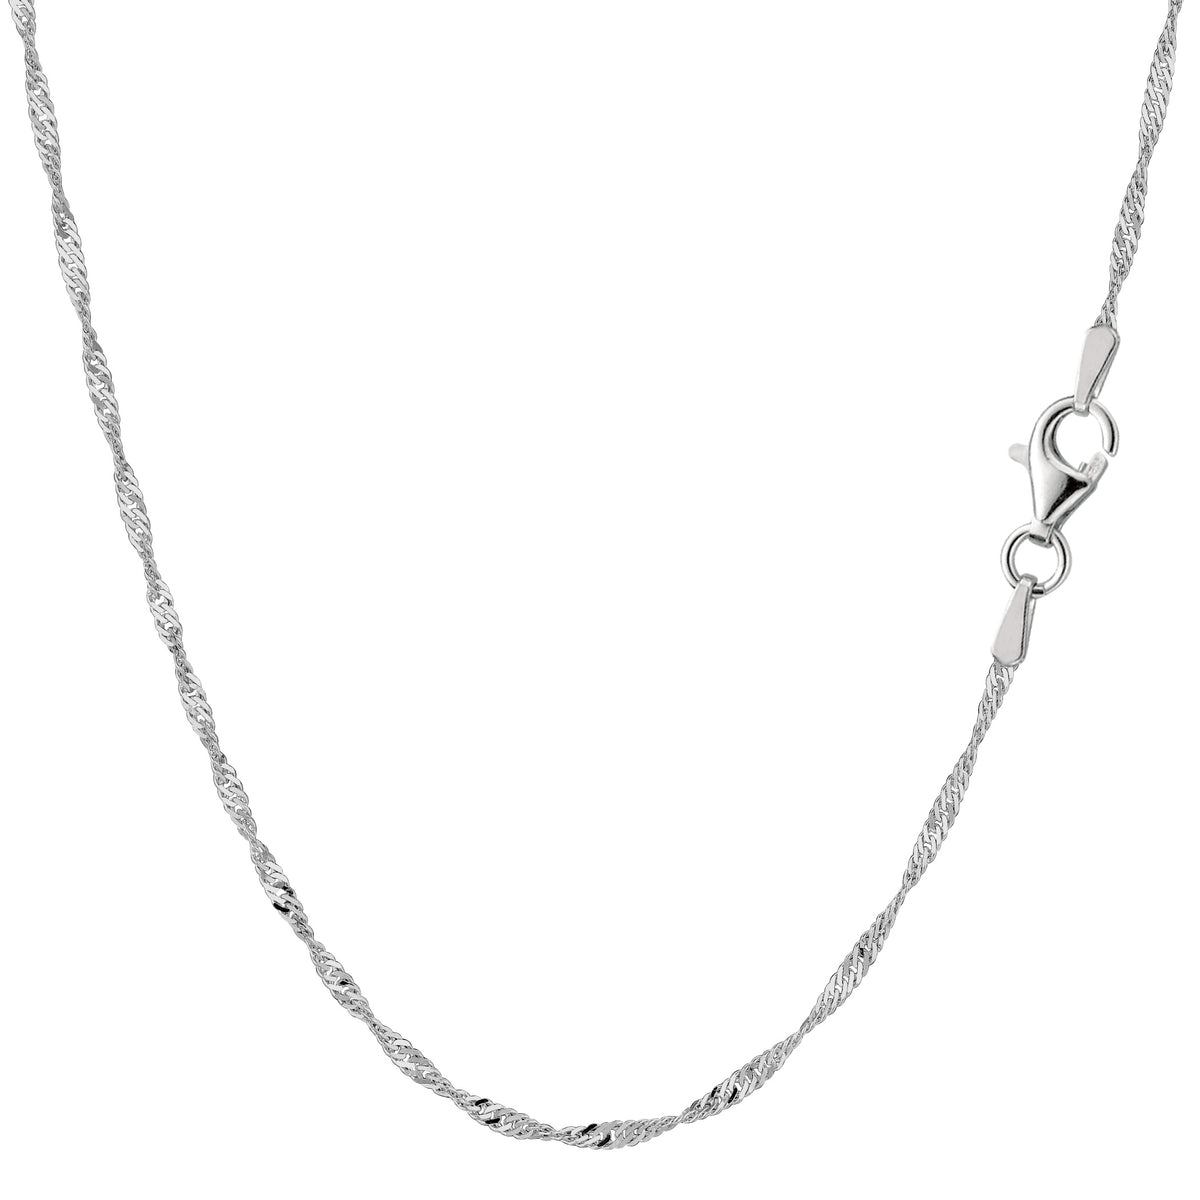 Sterling Silver Rhodium Plated Singapore Chain Necklace, 1.6mm